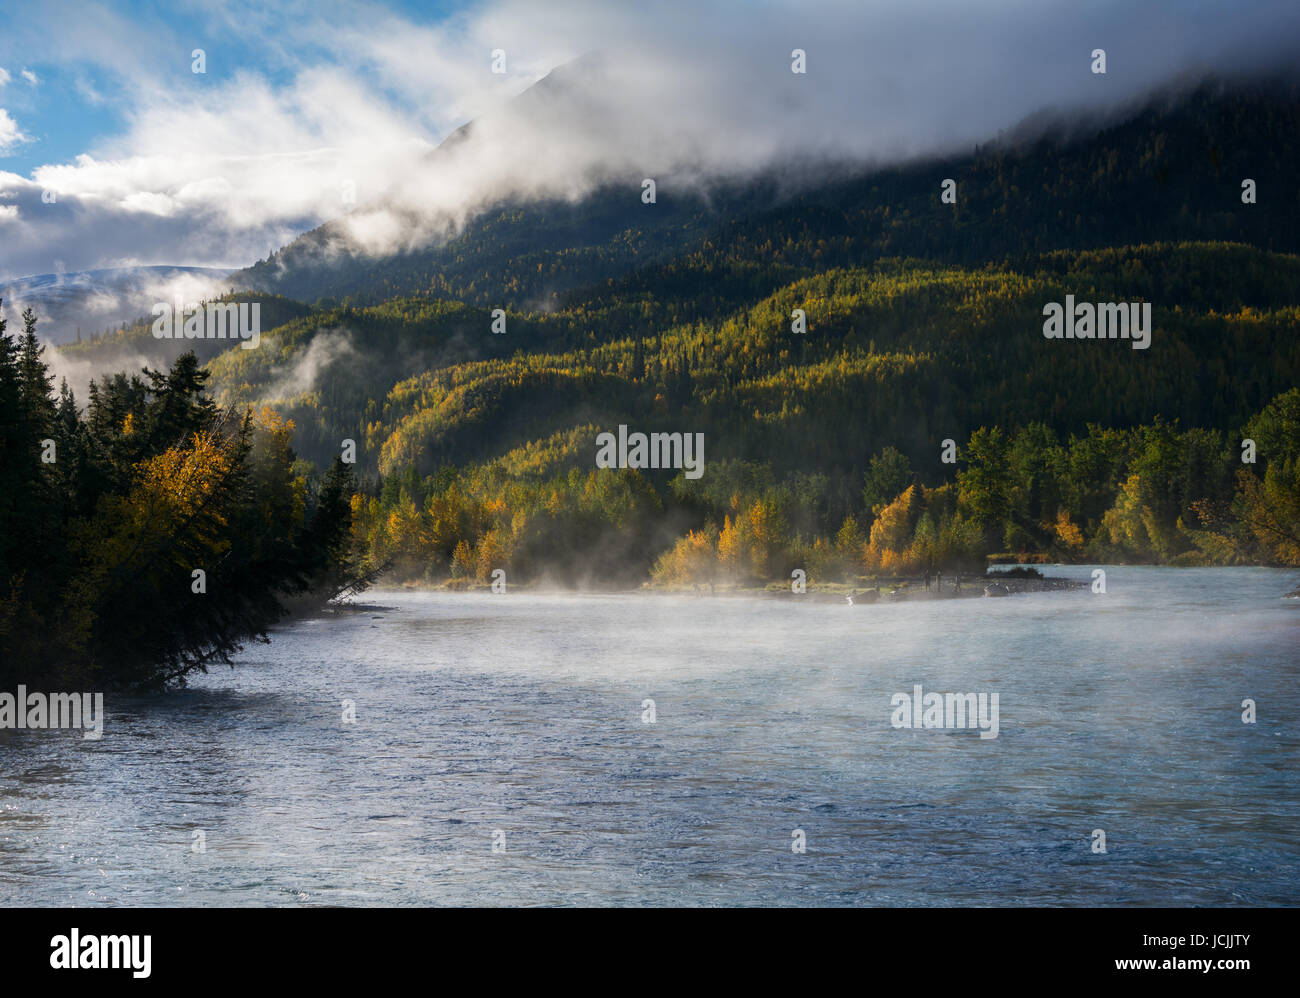 Warm water causes a mist to rise on the Russian River in south central Alaska. Stock Photo